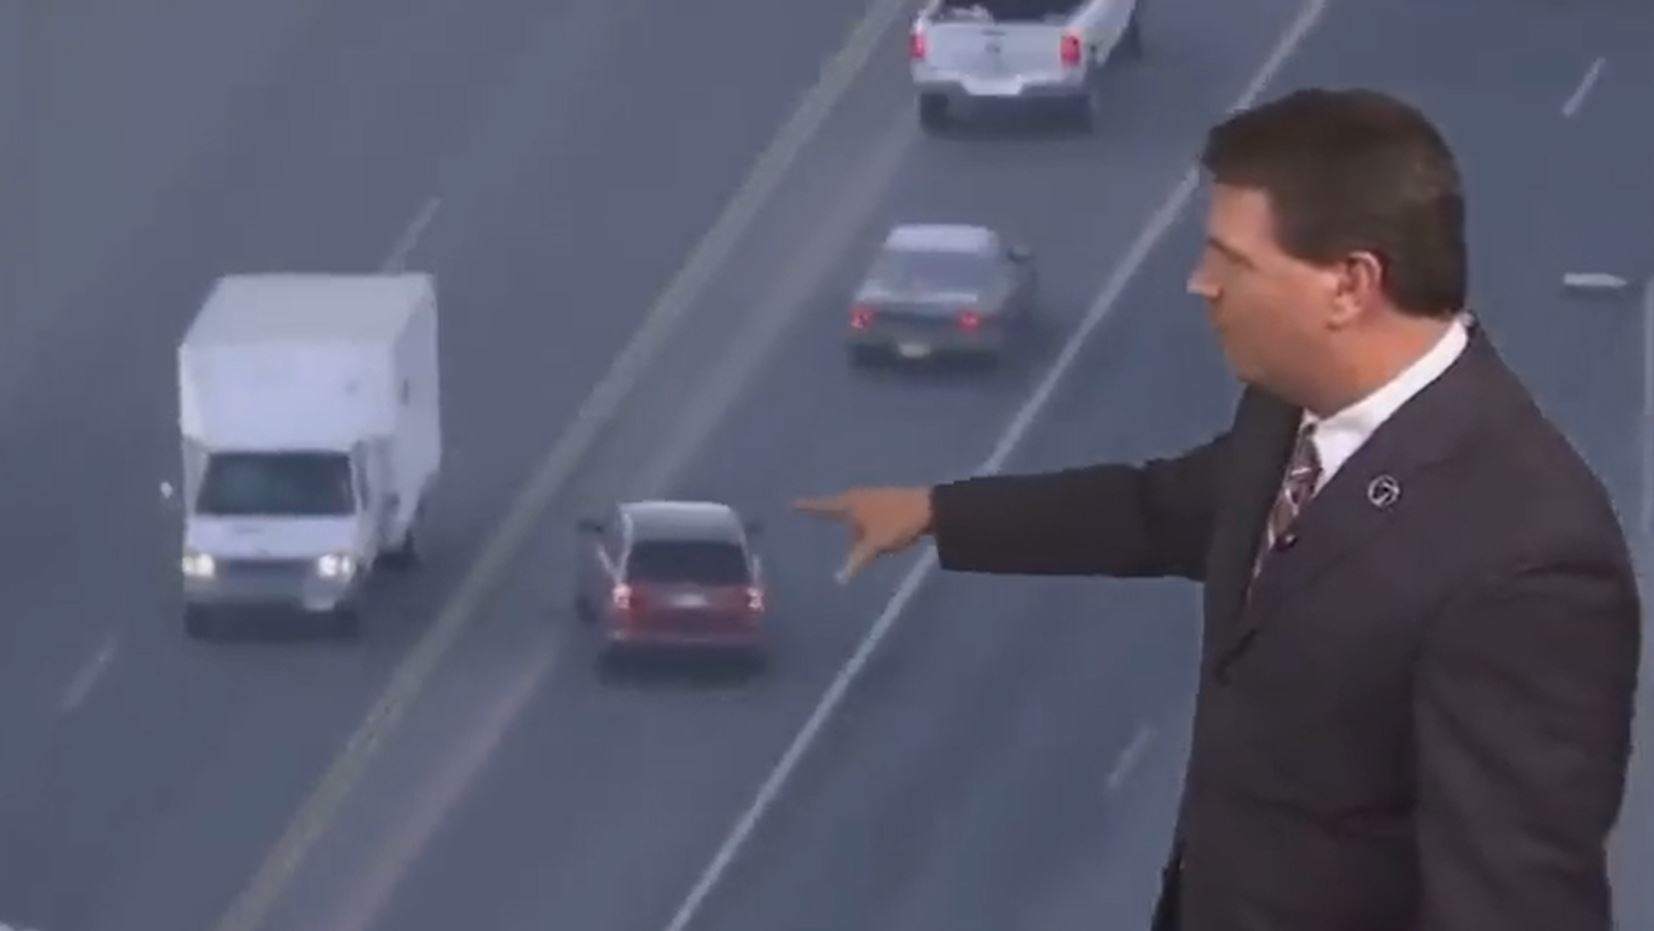 Bloke goes full GTA-mode in what surely is the wildest car-chase ever filmed